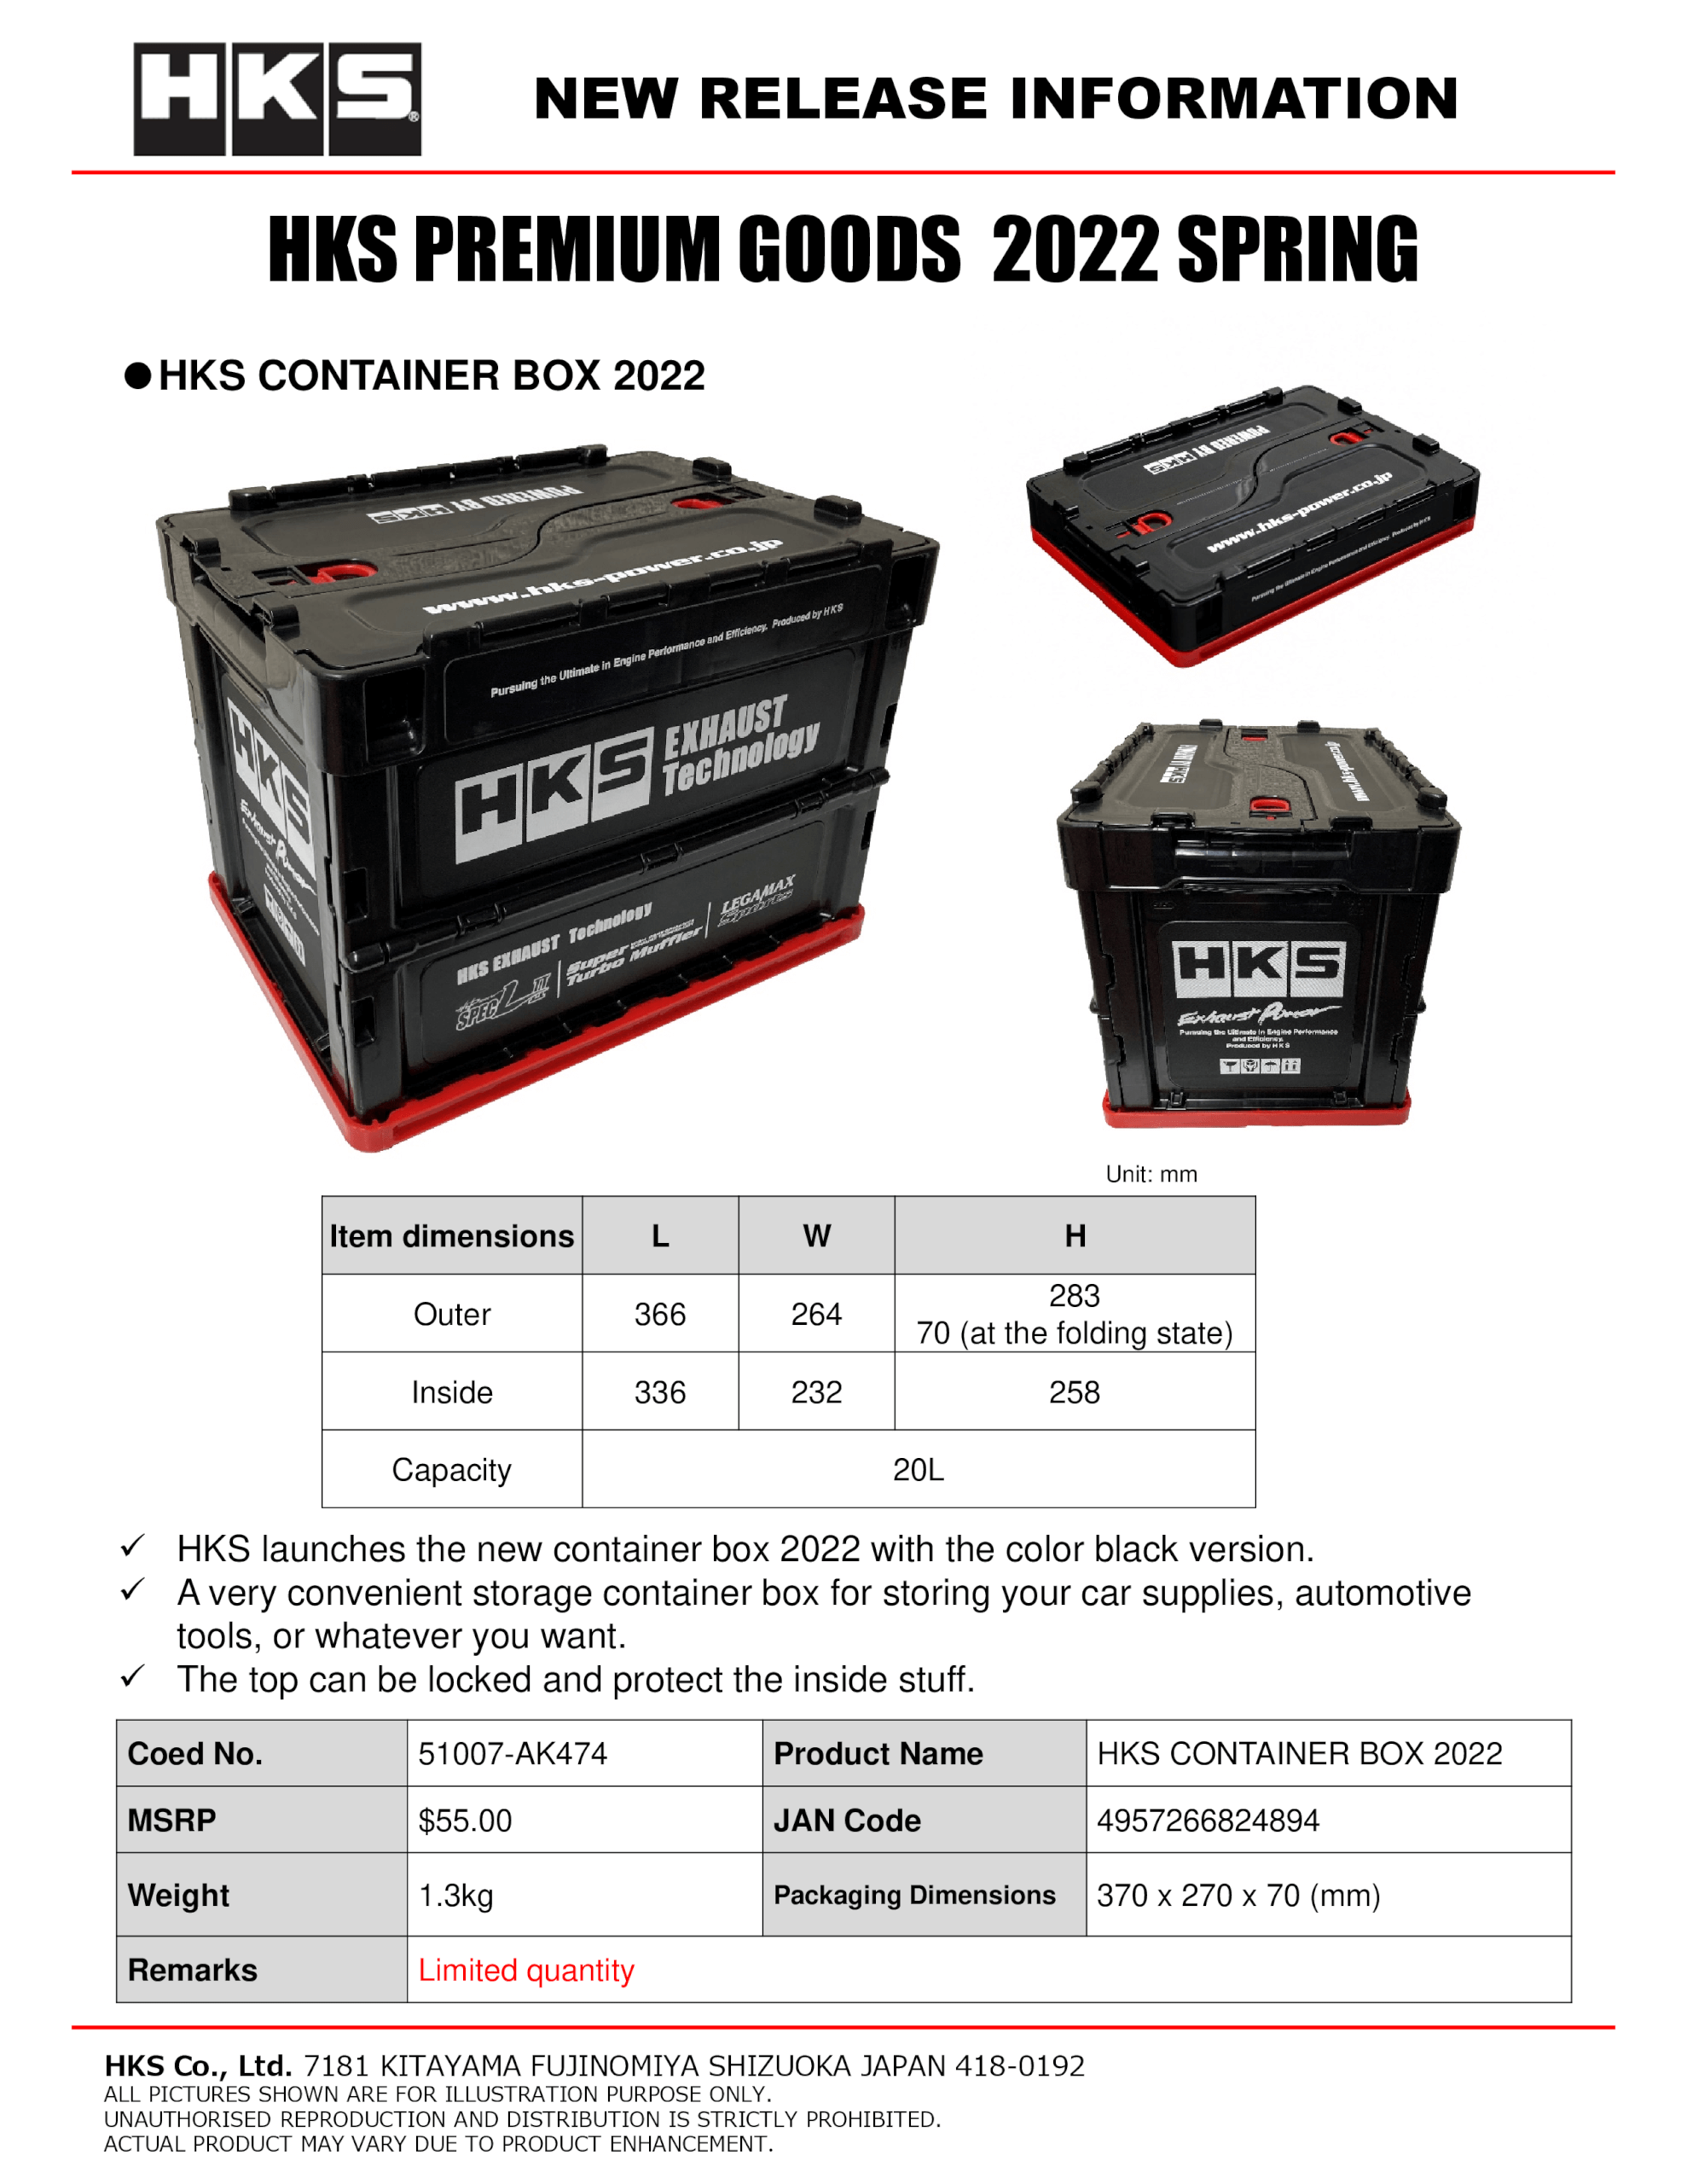 51007-AK474 HKS CONTAINER BOX 2022.png